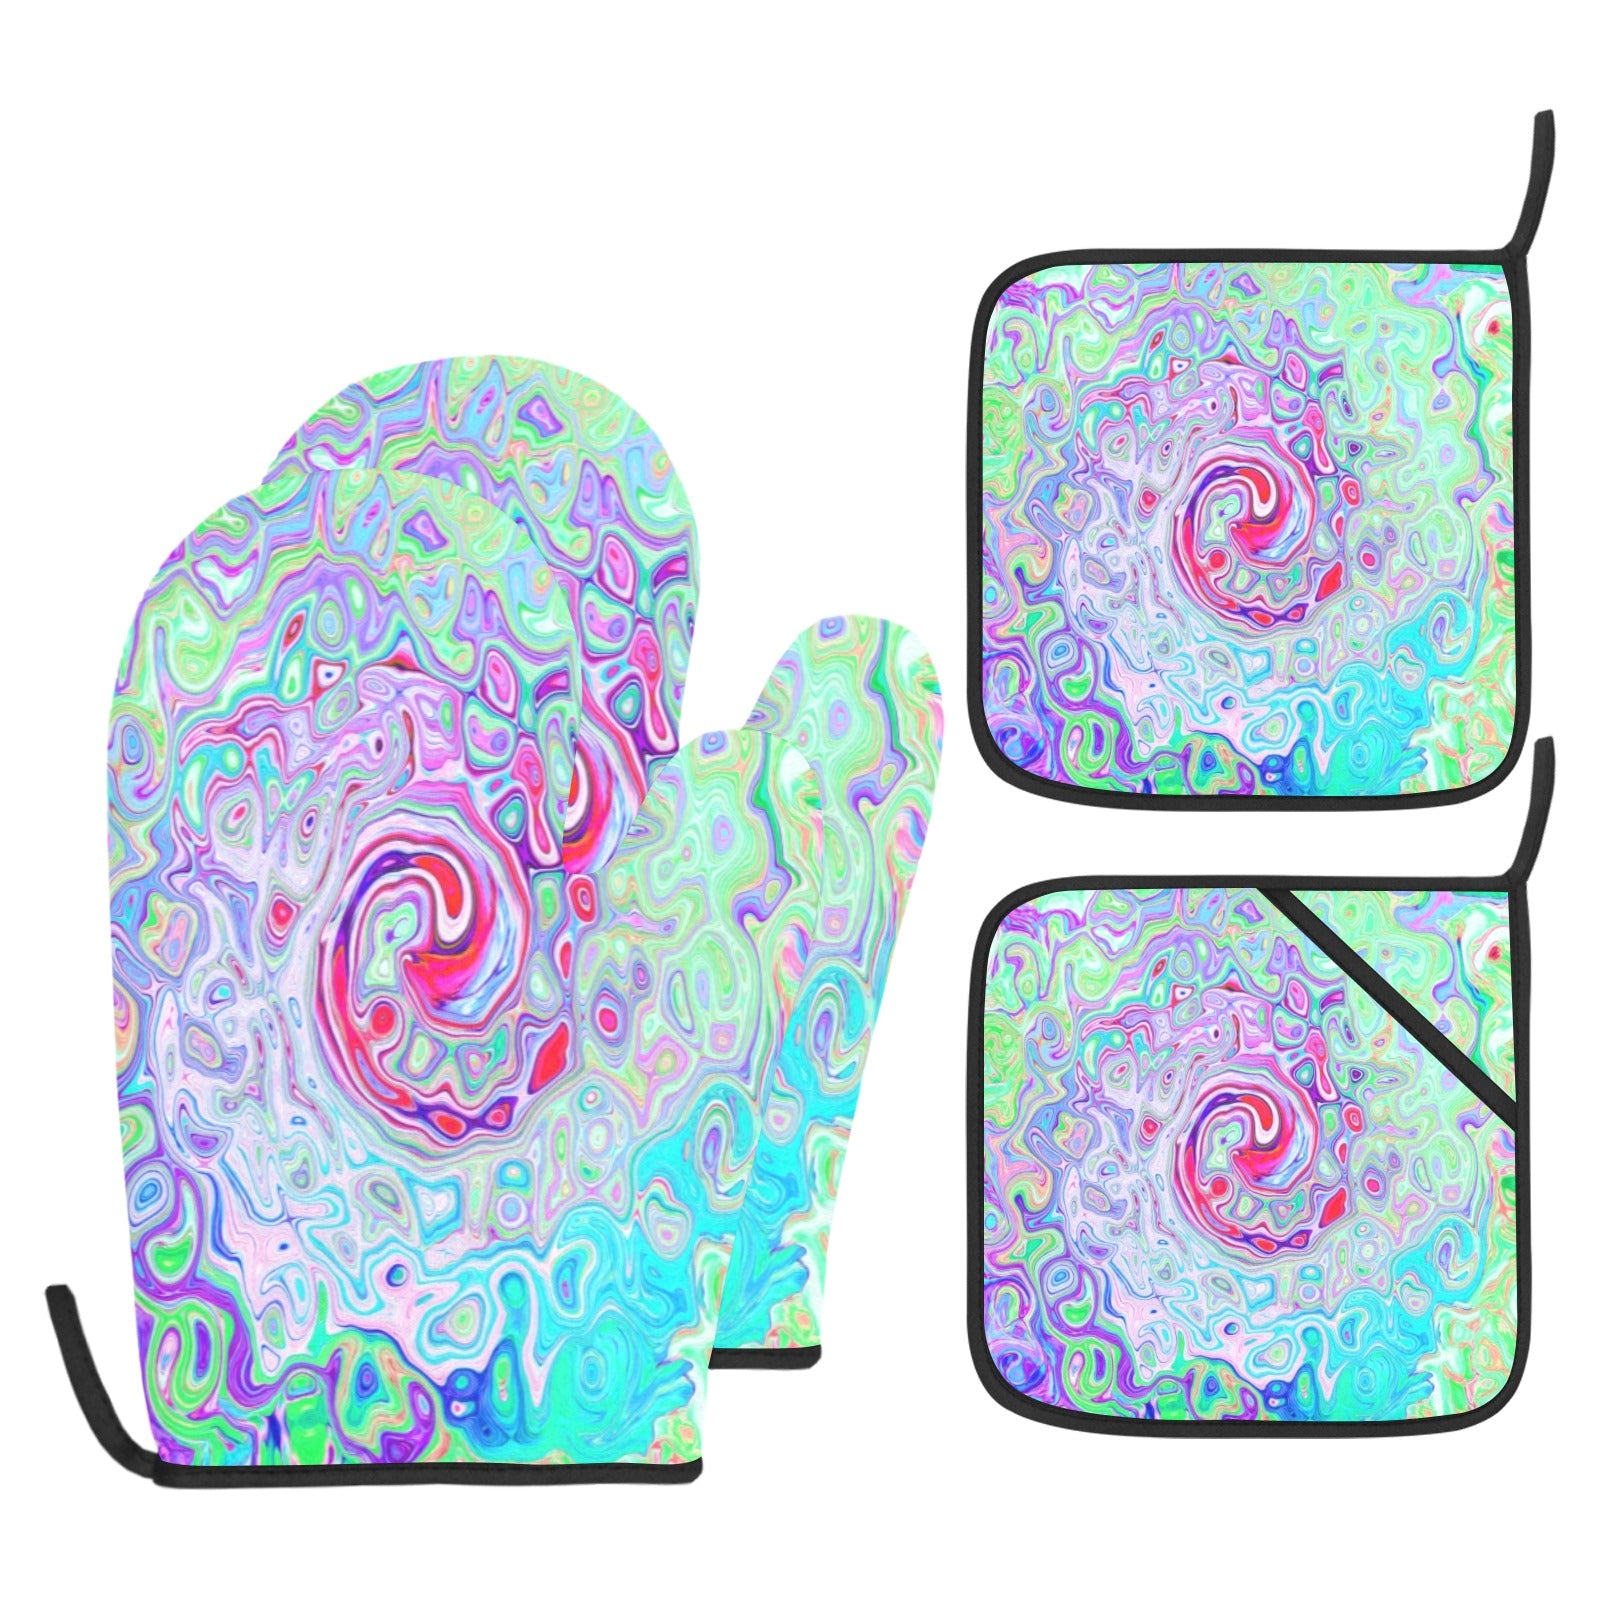 Oven Mitts and Pot Holders Set, Groovy Abstract Retro Pink and Green Swirl